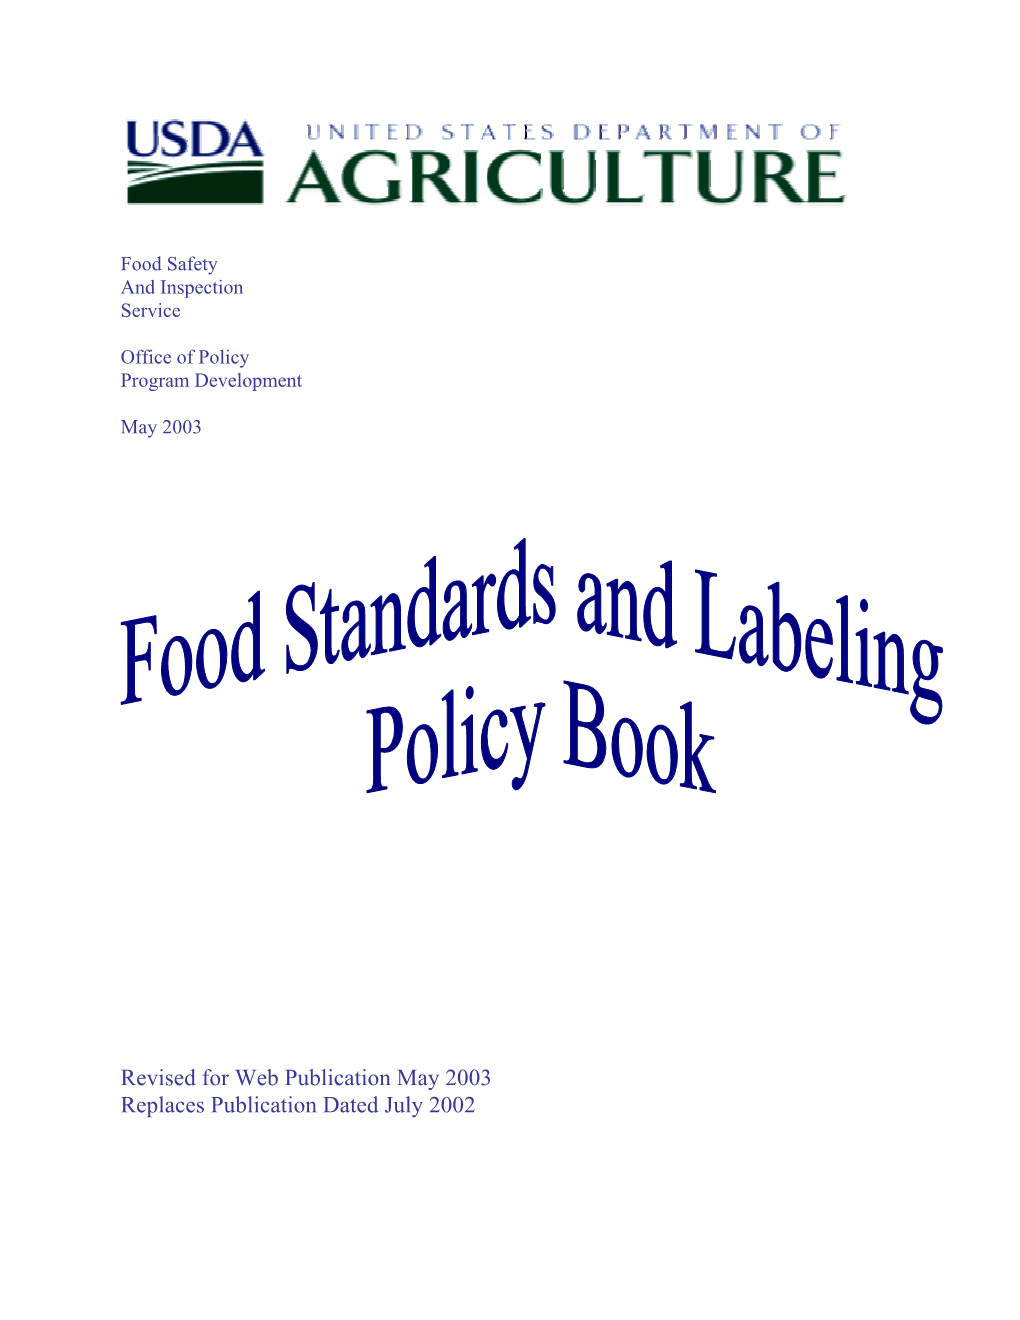 The Food Standards and Labeling Policy Book